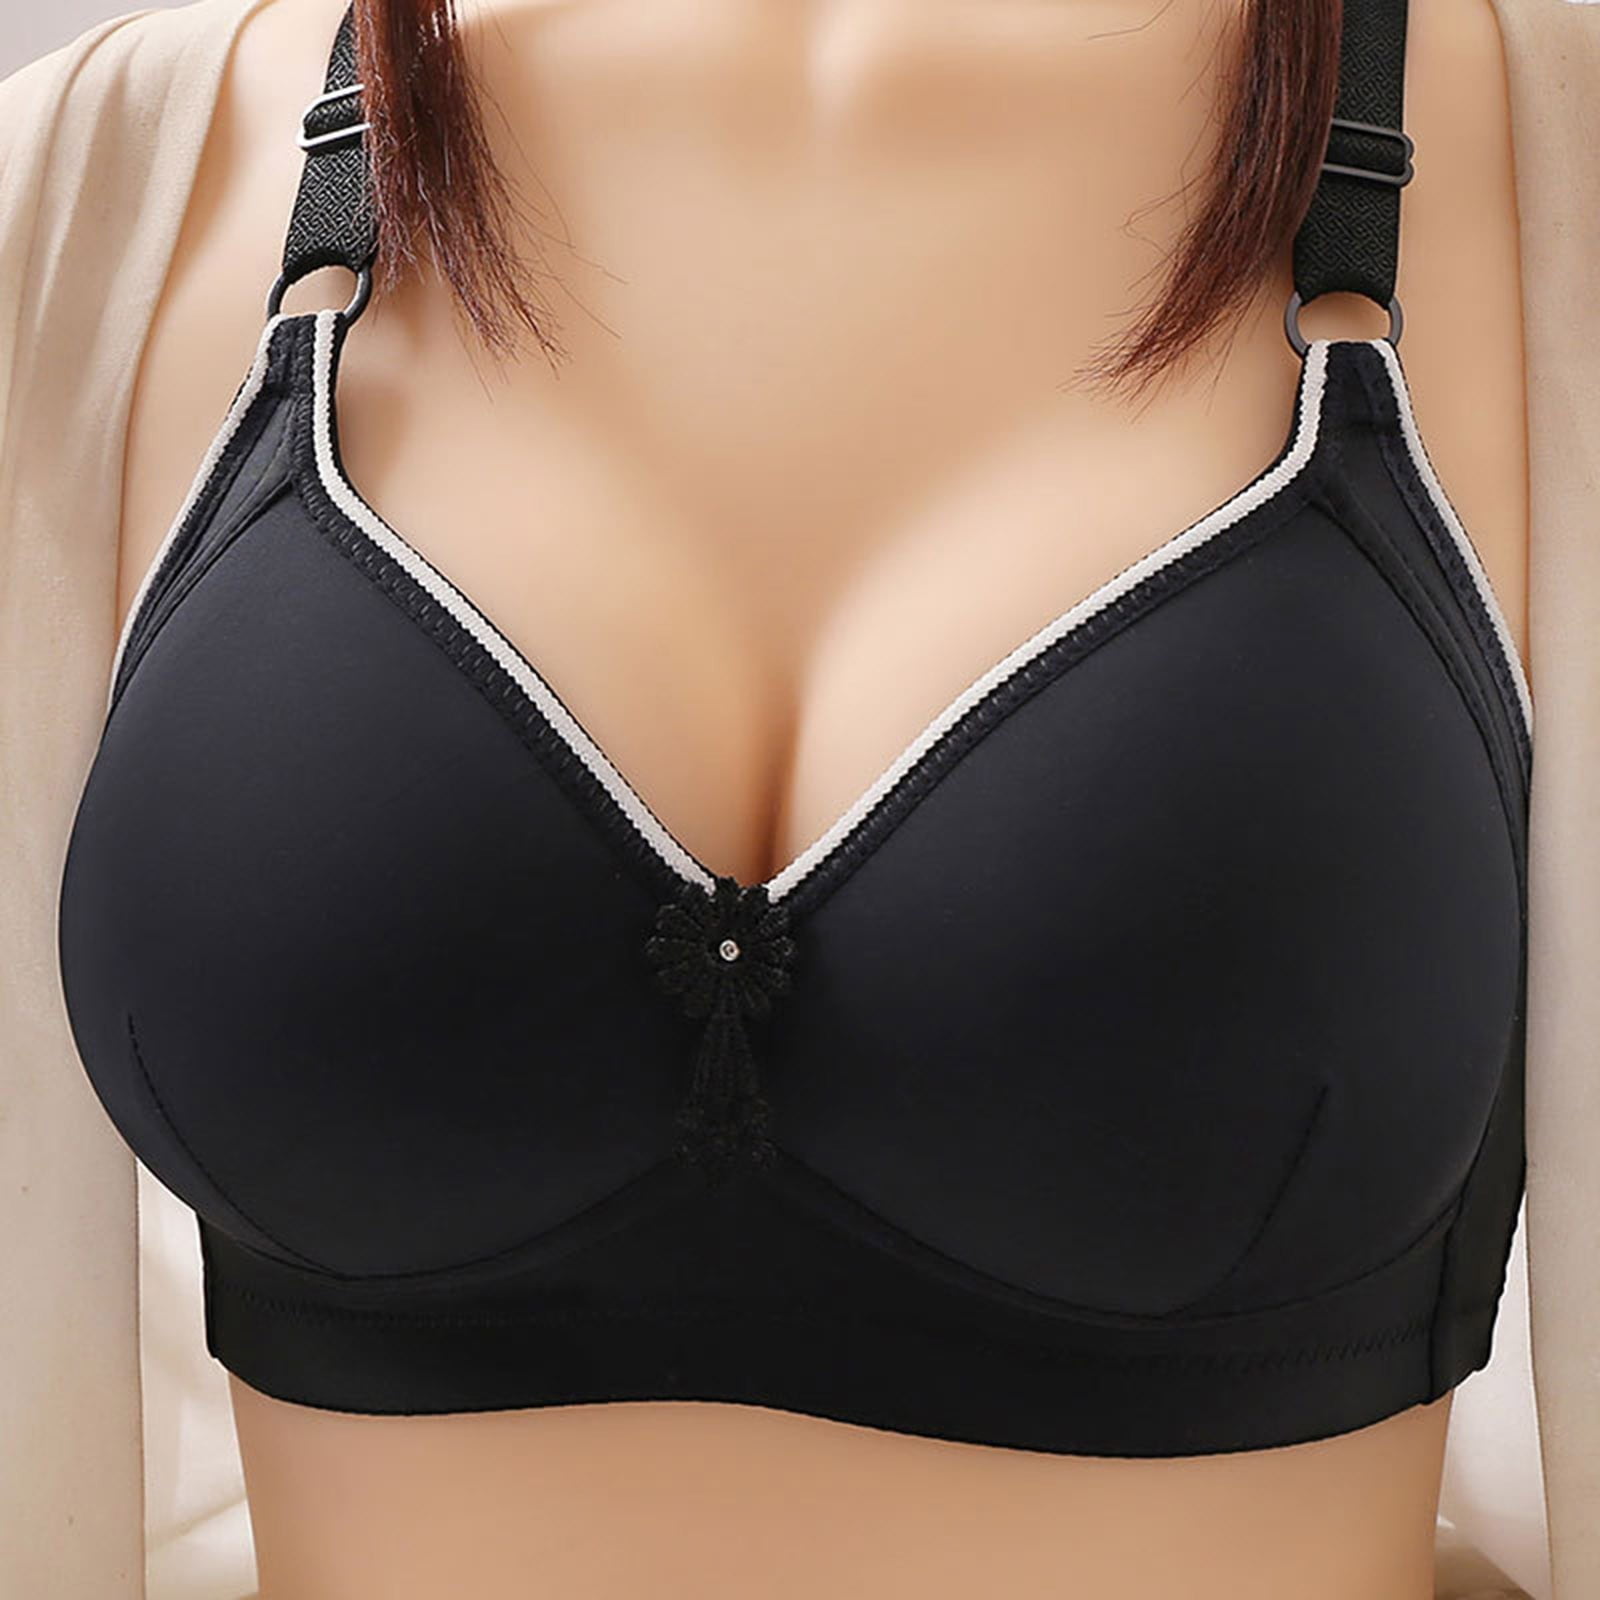 hoksml Plus Size Bras for Women,Woman's Embroidered Glossy